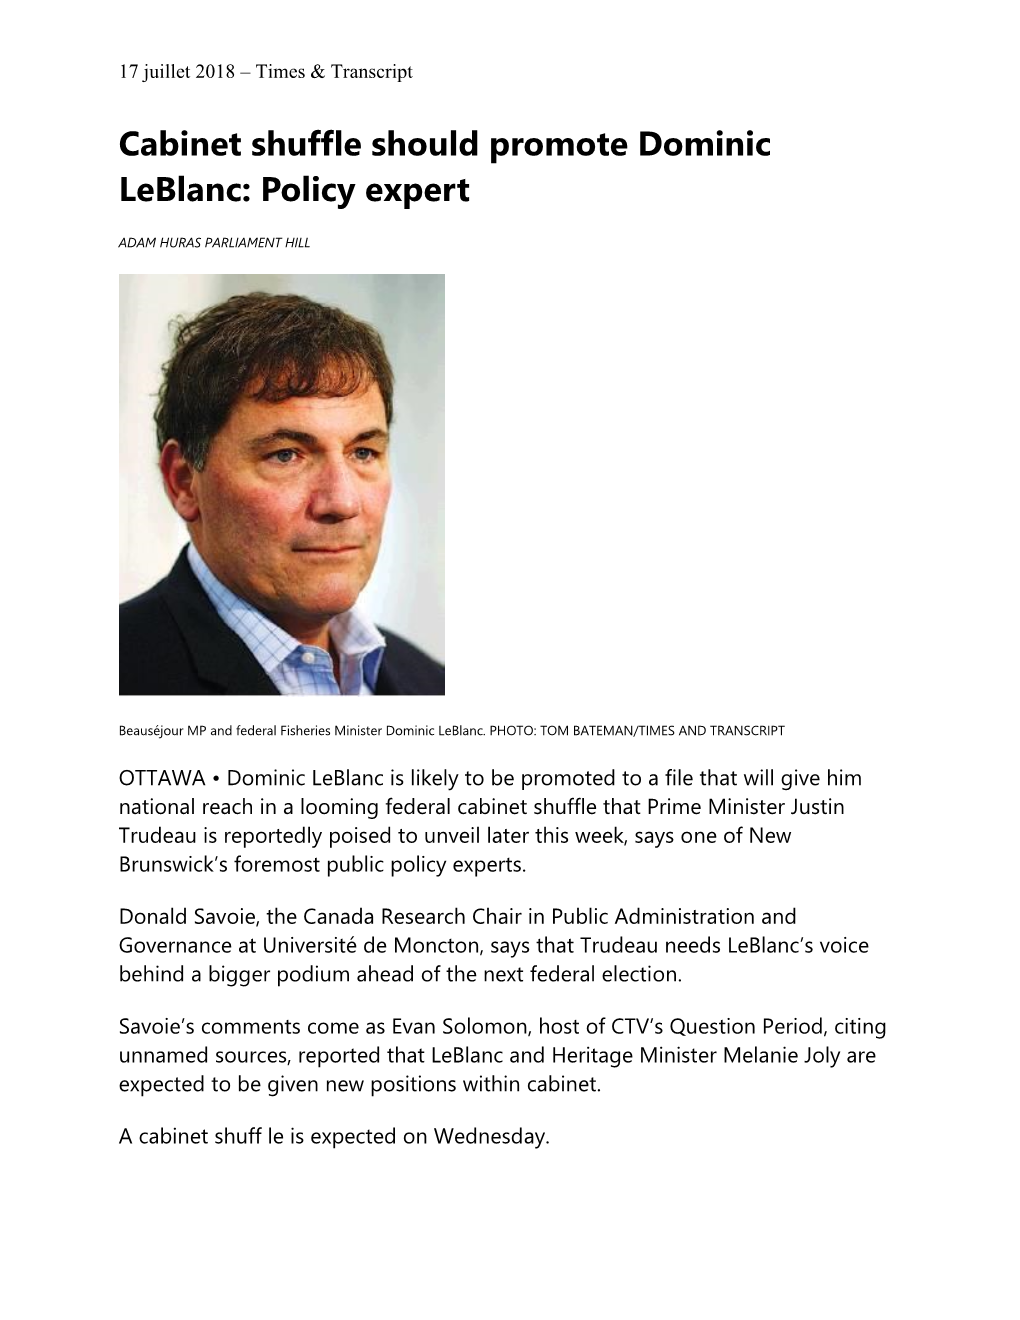 Cabinet Shuffle Should Promote Dominic Leblanc: Policy Expert